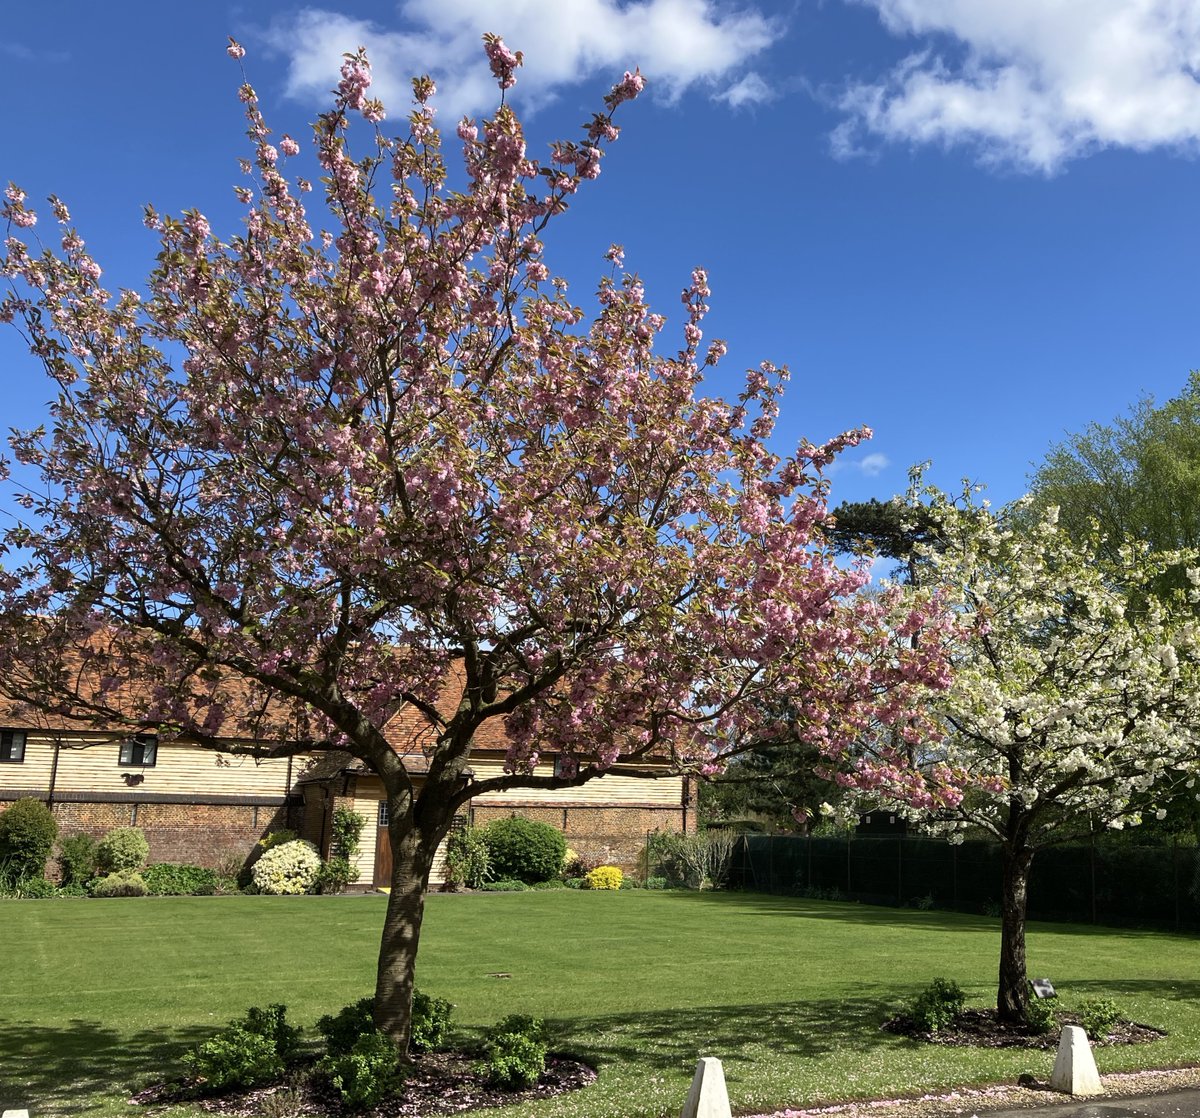 Junior King’s looks glorious with the beautiful blossom on the trees and the pristine gardens, ready to welcome the community back this morning for the start of the Summer Term. #summerterm #newterm #summer #exciting #opportunities #education #Sturry #Canterbury